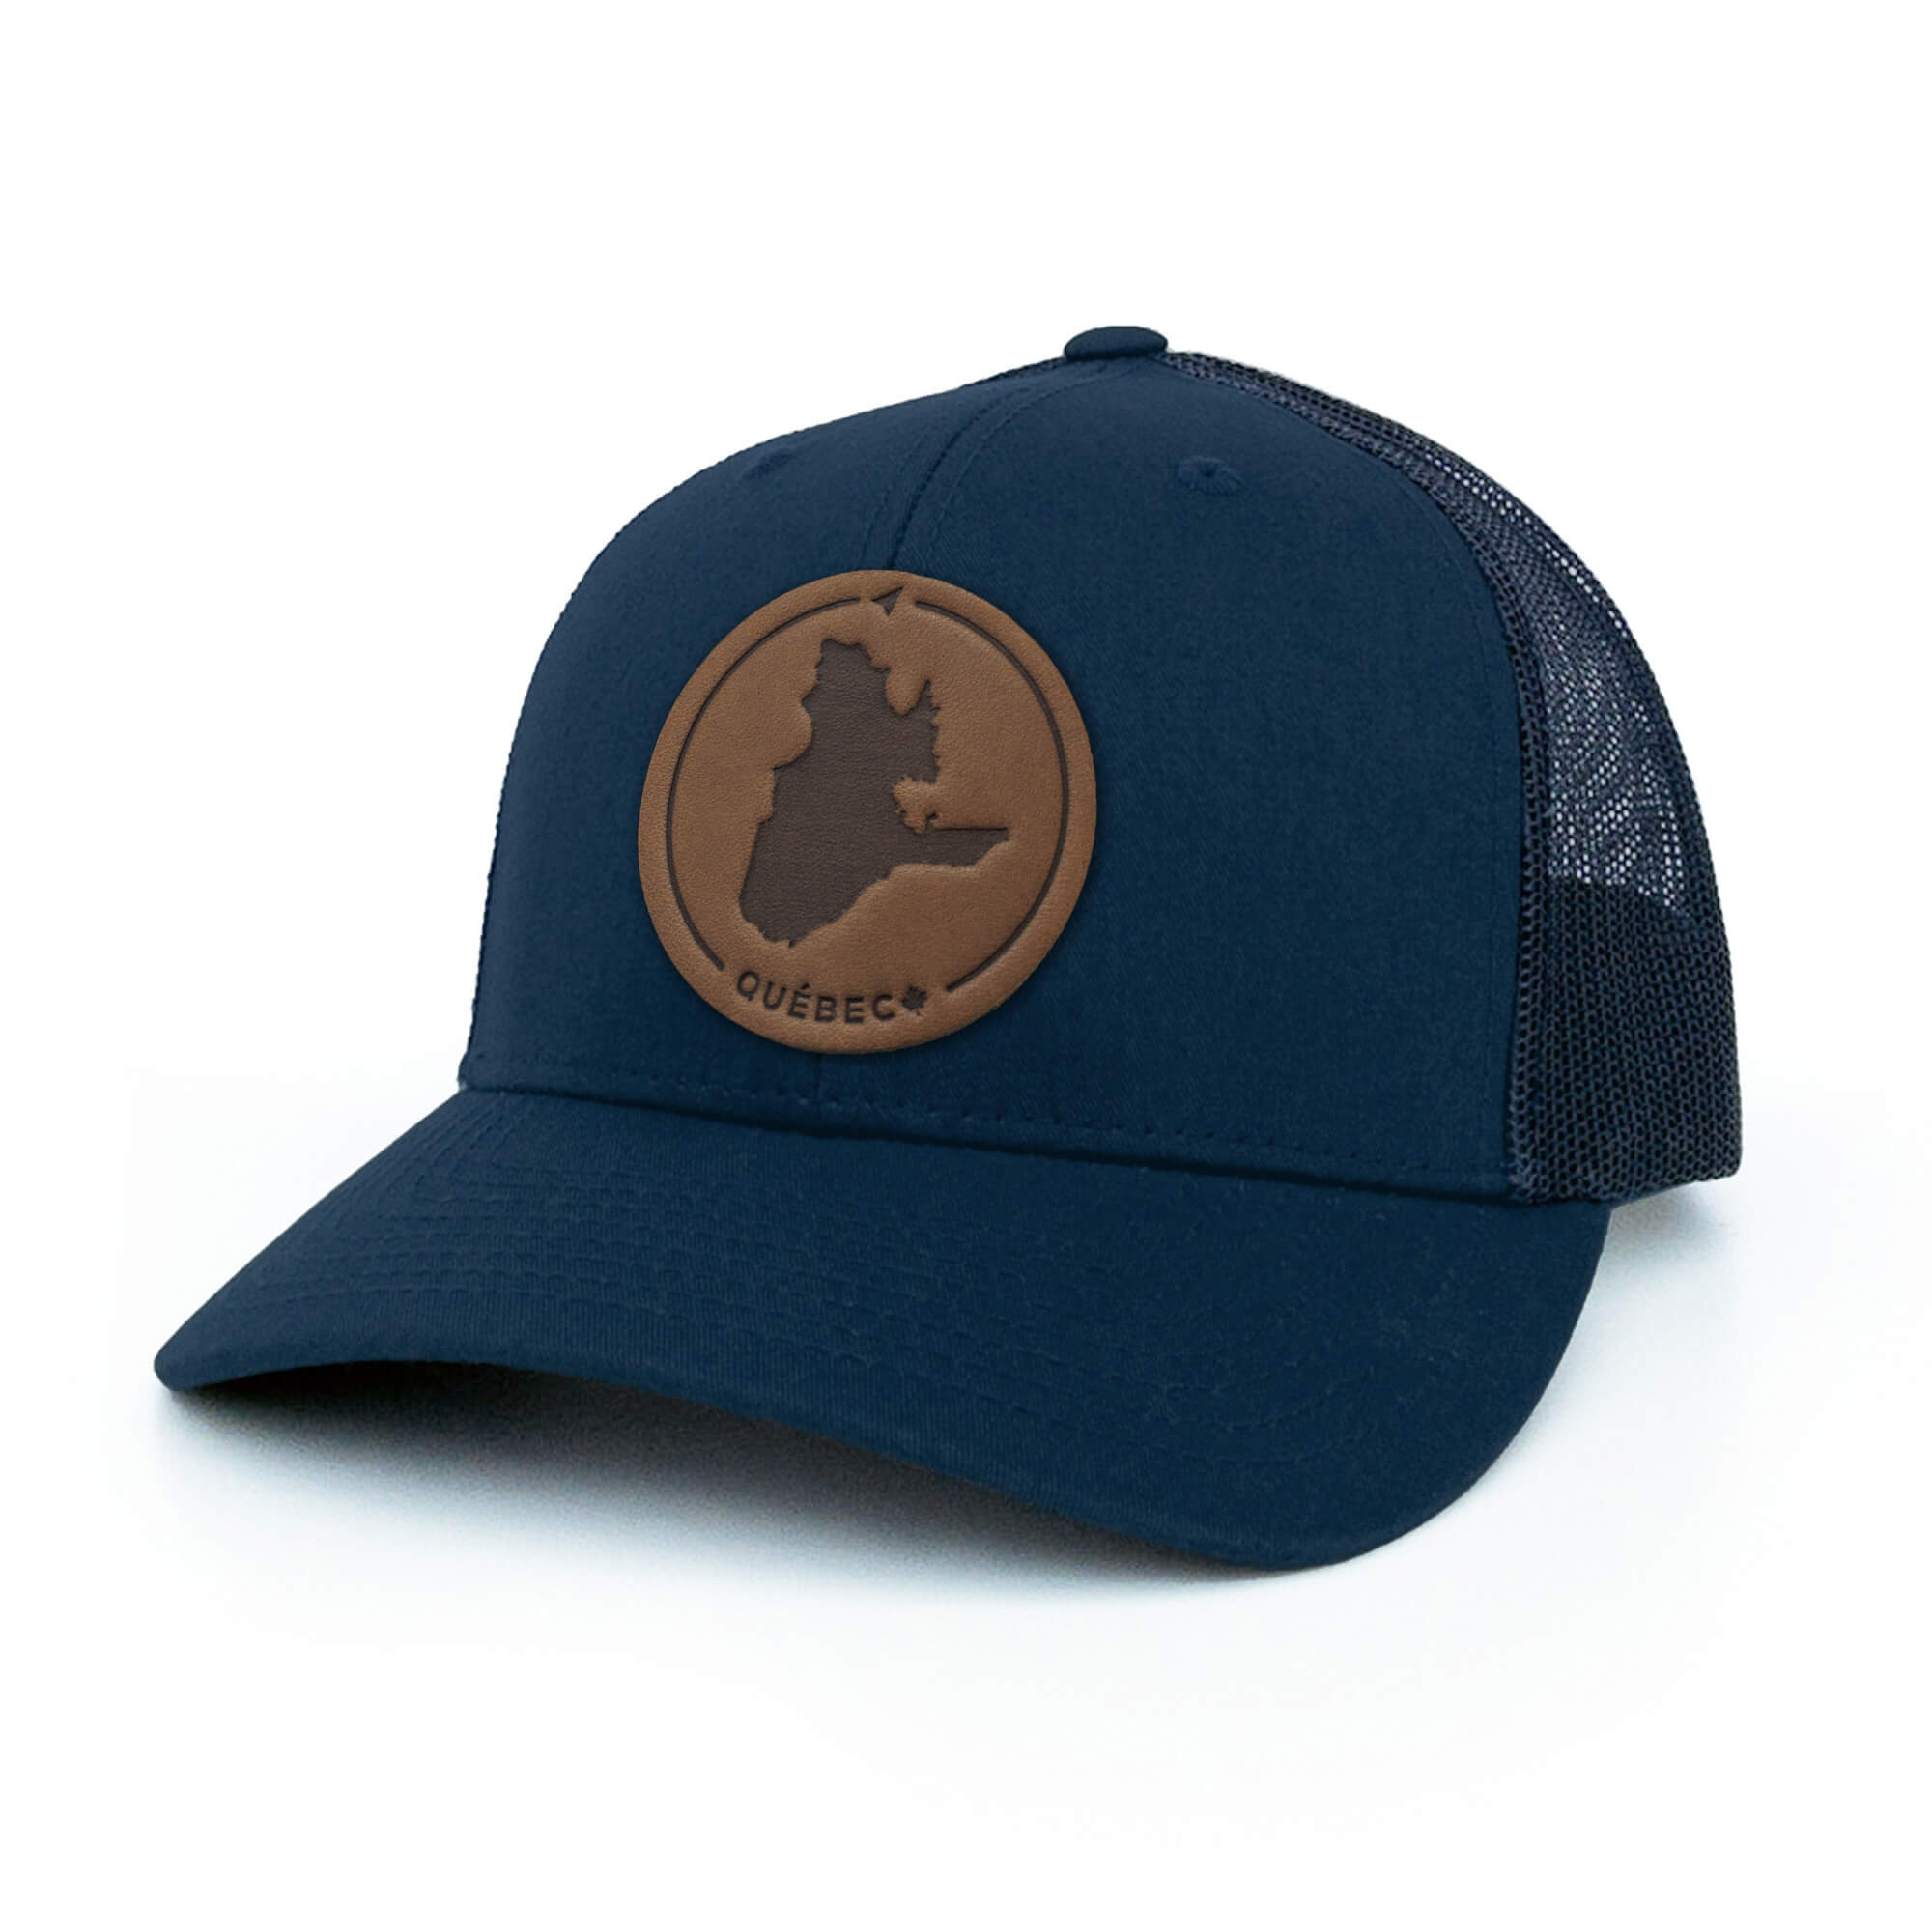 Navy trucker hat with full-grain leather patch of Québec | BLACK-002-006, CHARC-002-006, NAVY-002-006, HGREY-002-006, MOSS-002-006, BROWN-002-006